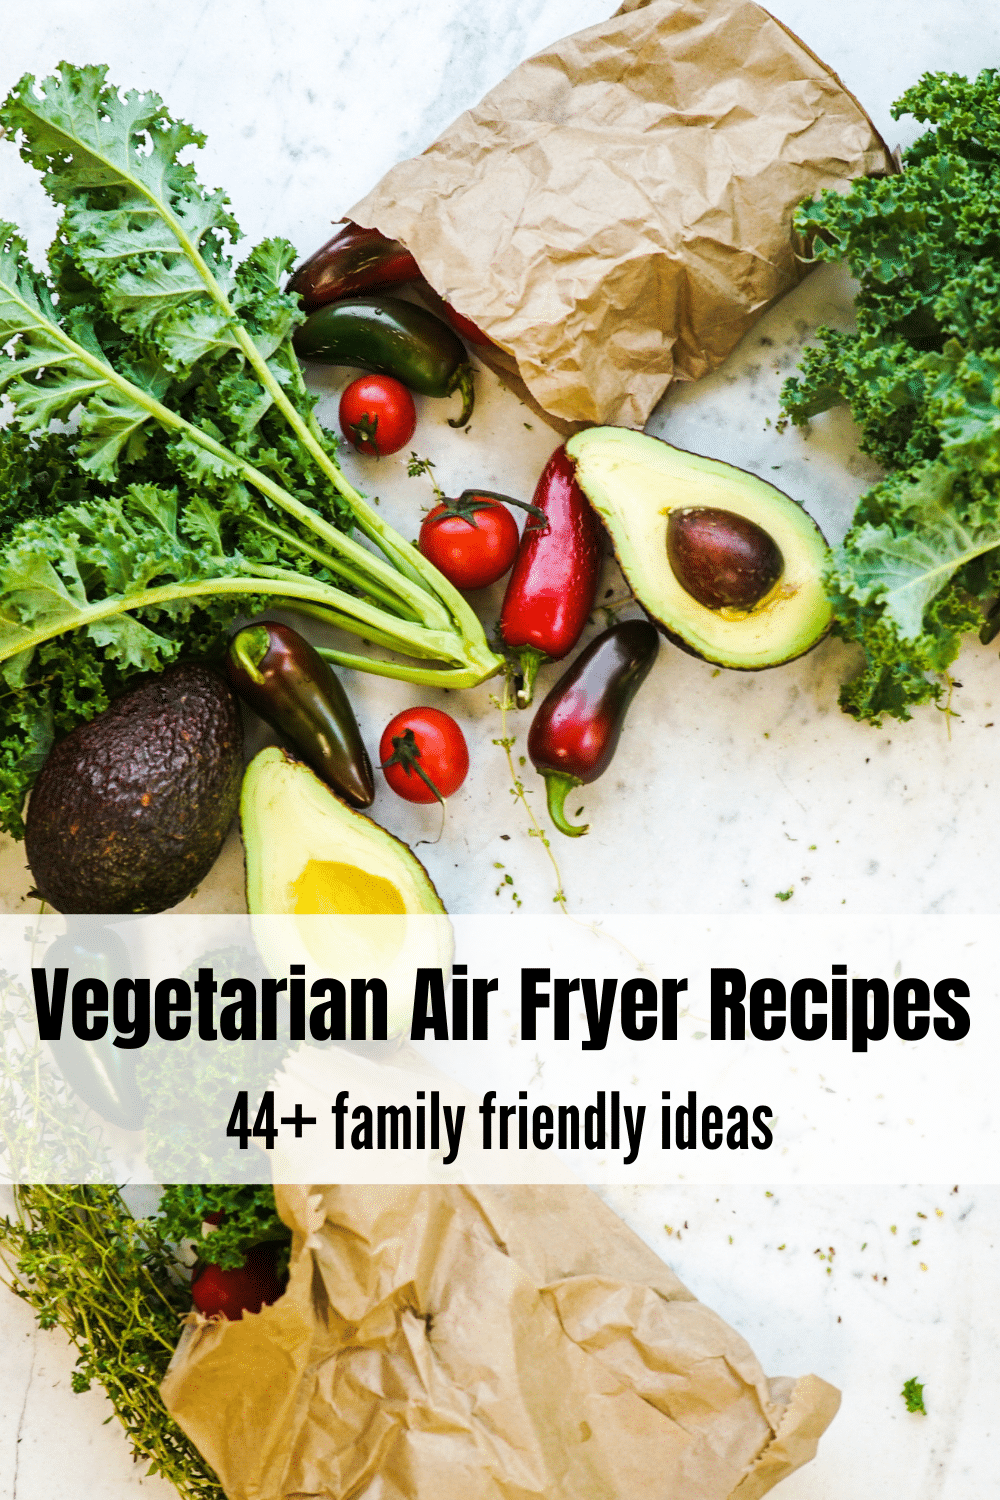 Vegetarian Air Fryer Recipes are becoming popular among air fryer users. Whether you are celebrating a Meatless Monday or are completely vegetarian, these air fryer recipes are drool worthy. #vegetarianairfryer #airfryerrecipes #vegetarianrecipes via @vegetarianmamma